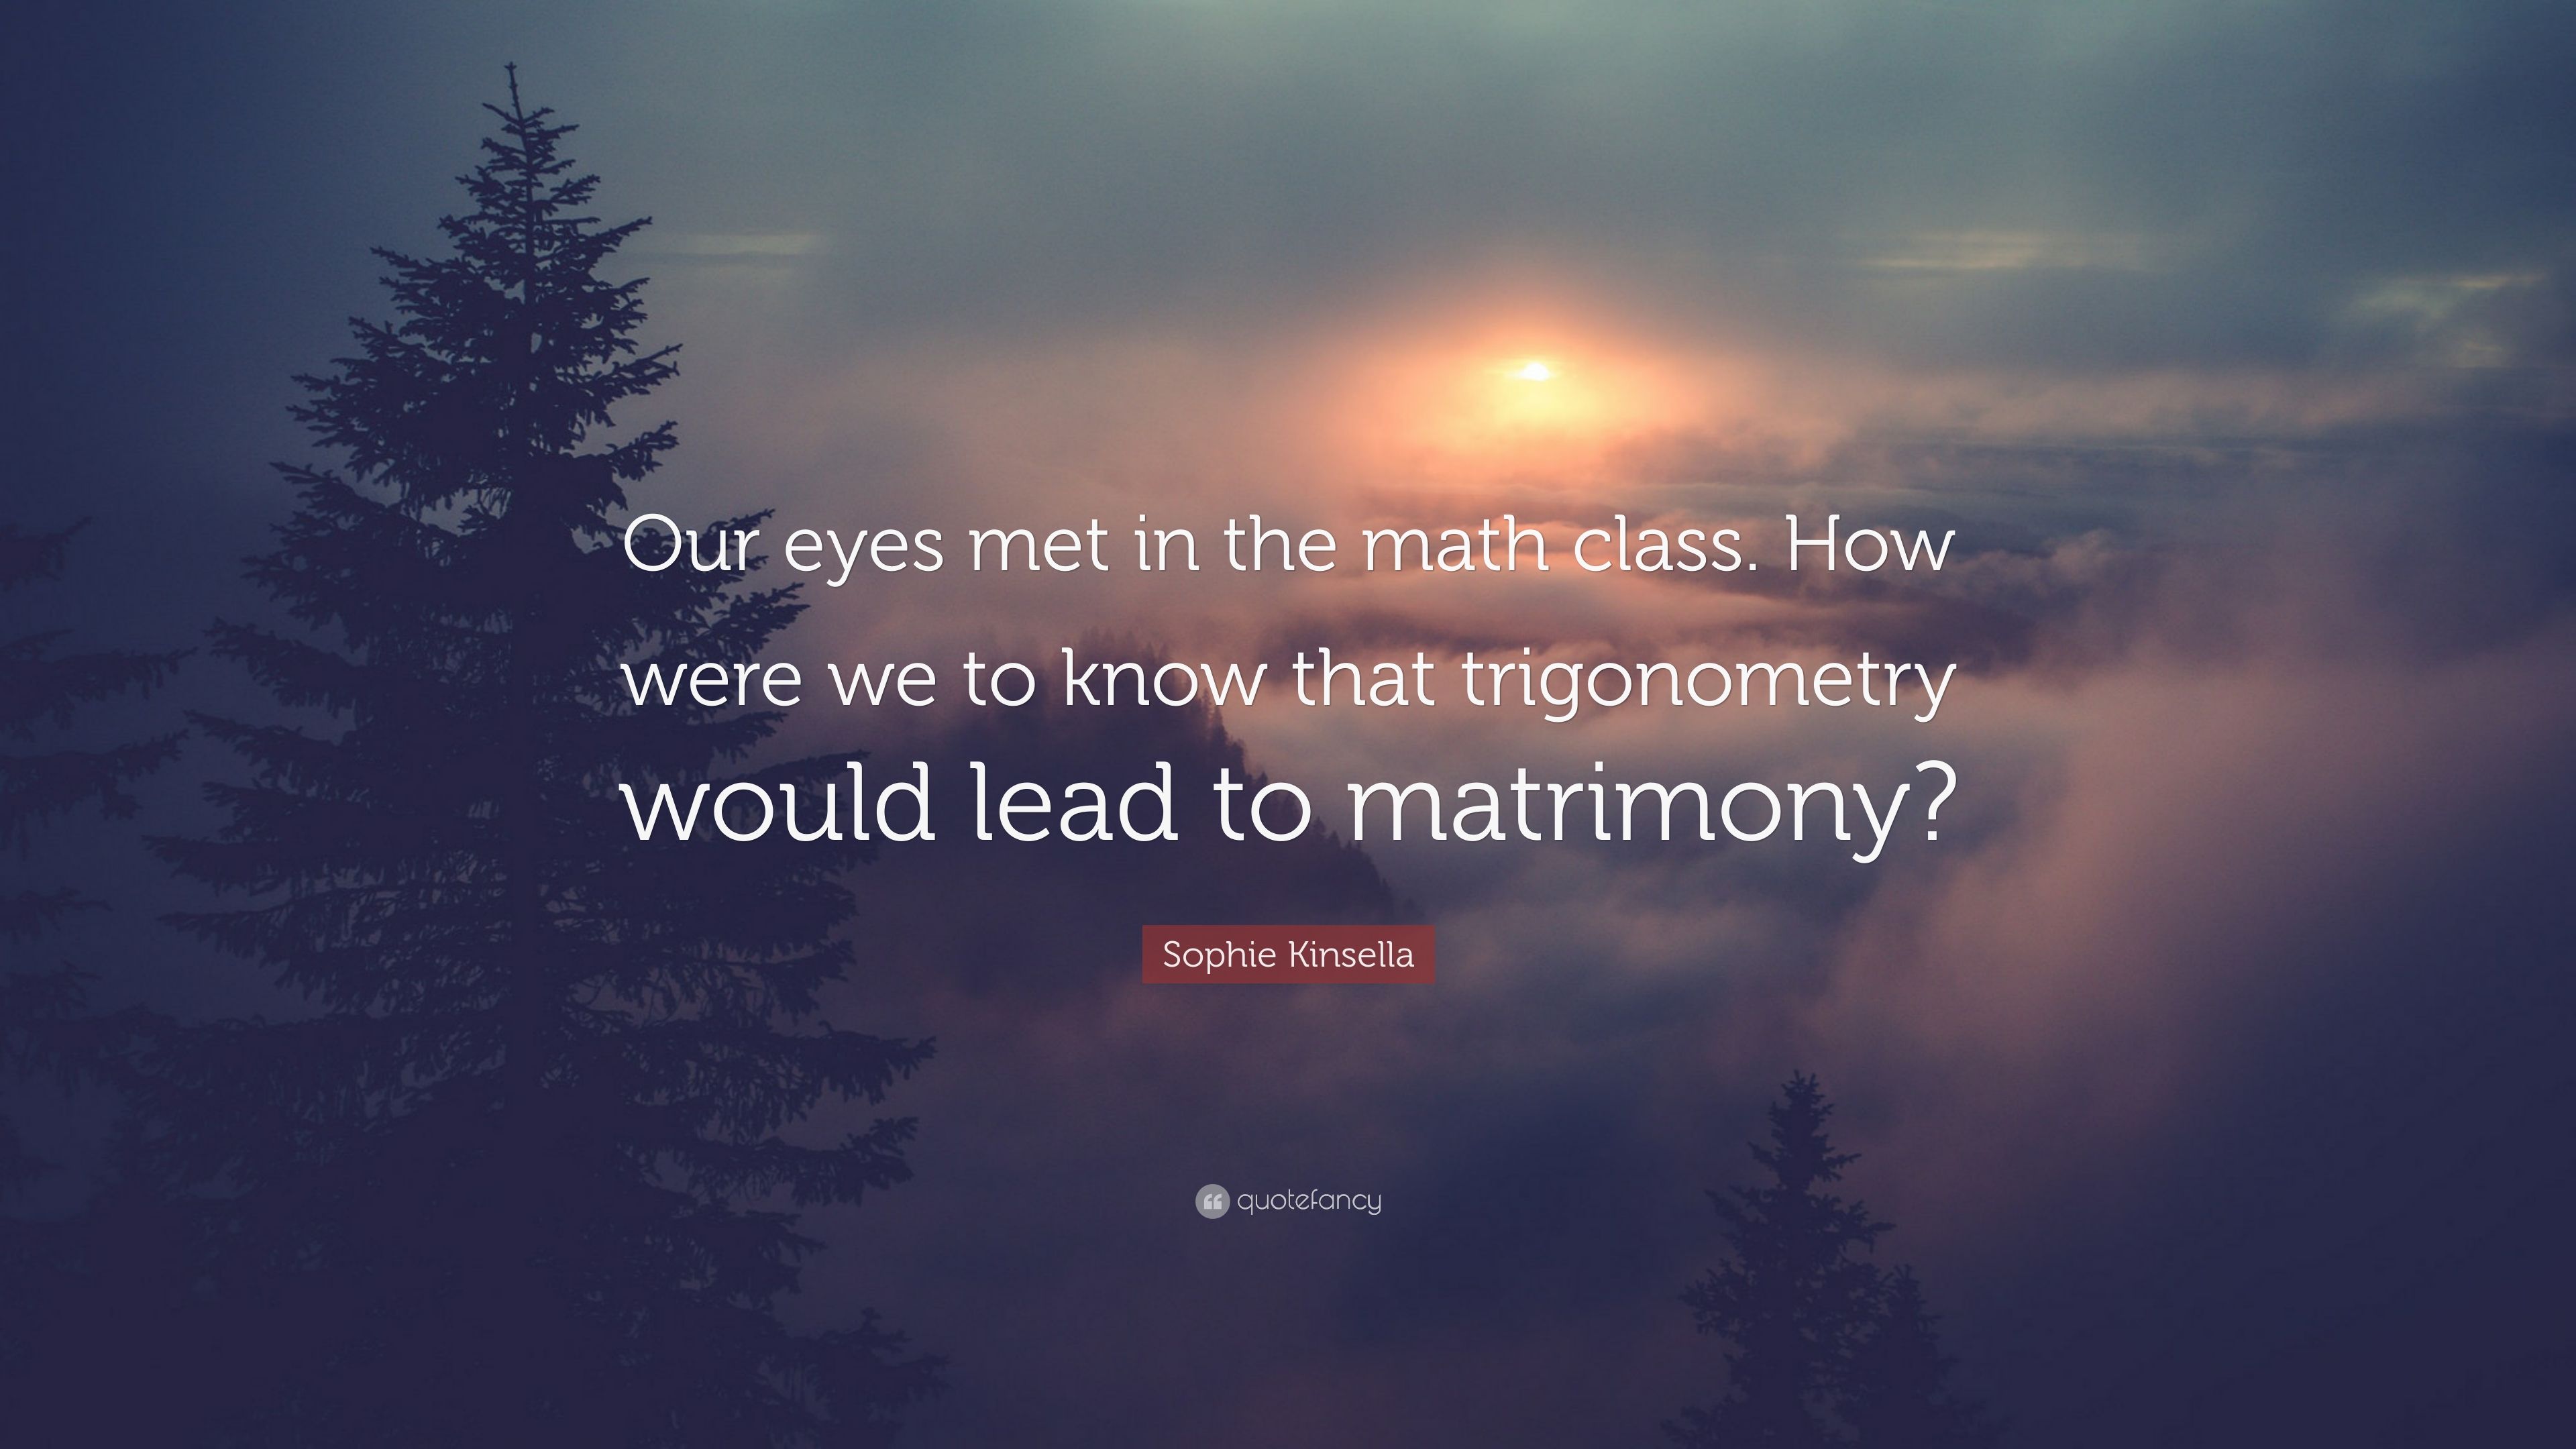 Sophie Kinsella Quote: “Our eyes met in the math class. How were we to know that trigonometry would lead to matrimony?” (7 wallpaper)